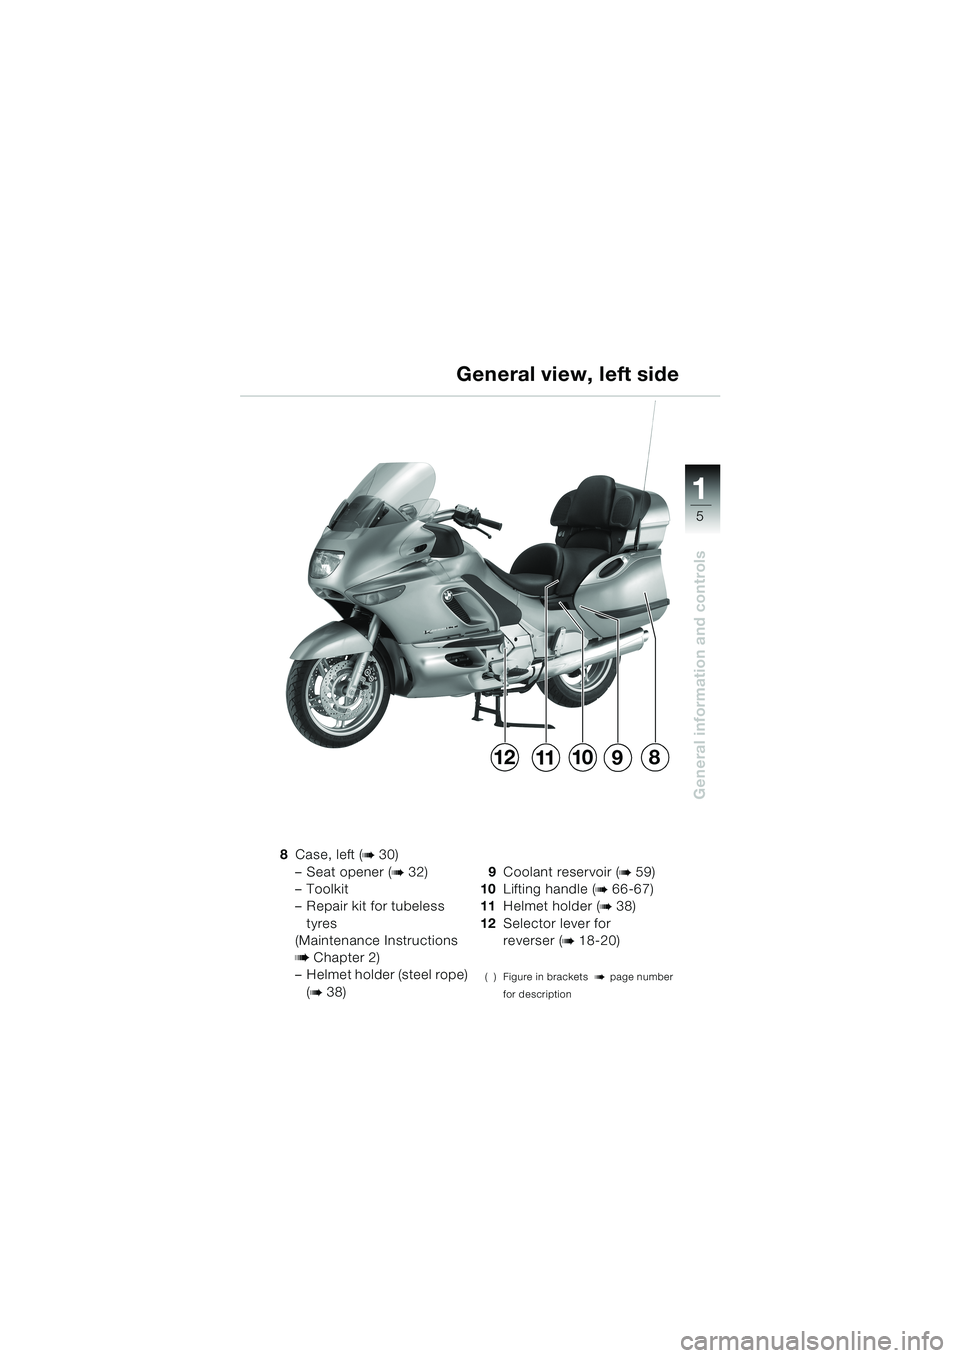 BMW MOTORRAD K 1200 LT 2002  Riders Manual (in English) 5
General information and controls
1
General view, left side
8Case, left (b 30)
–Seat opener (
b 32)
–Toolkit 
–Repair kit for tubeless 
tyres
(Maintenance Instructions 
b Chapter 2)
–Helmet h